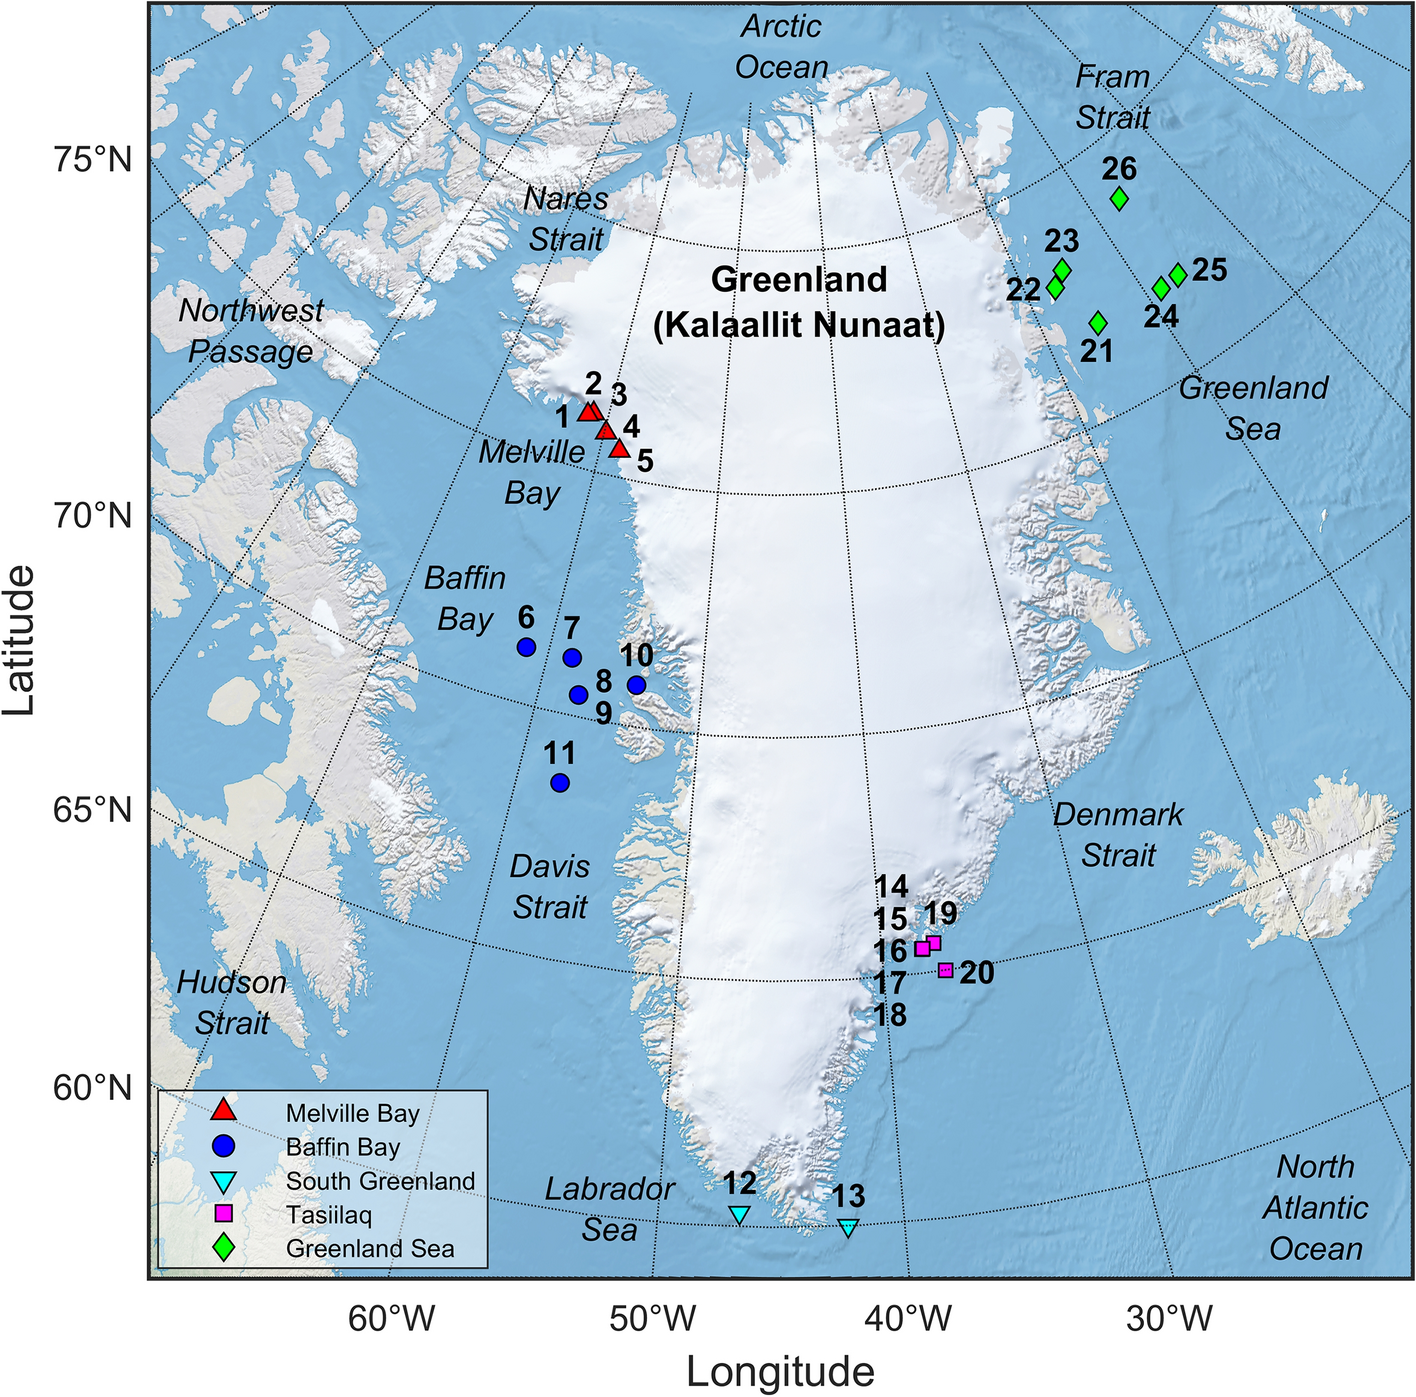 Soundscape and ambient noise levels of the Arctic waters around Greenland Scientific